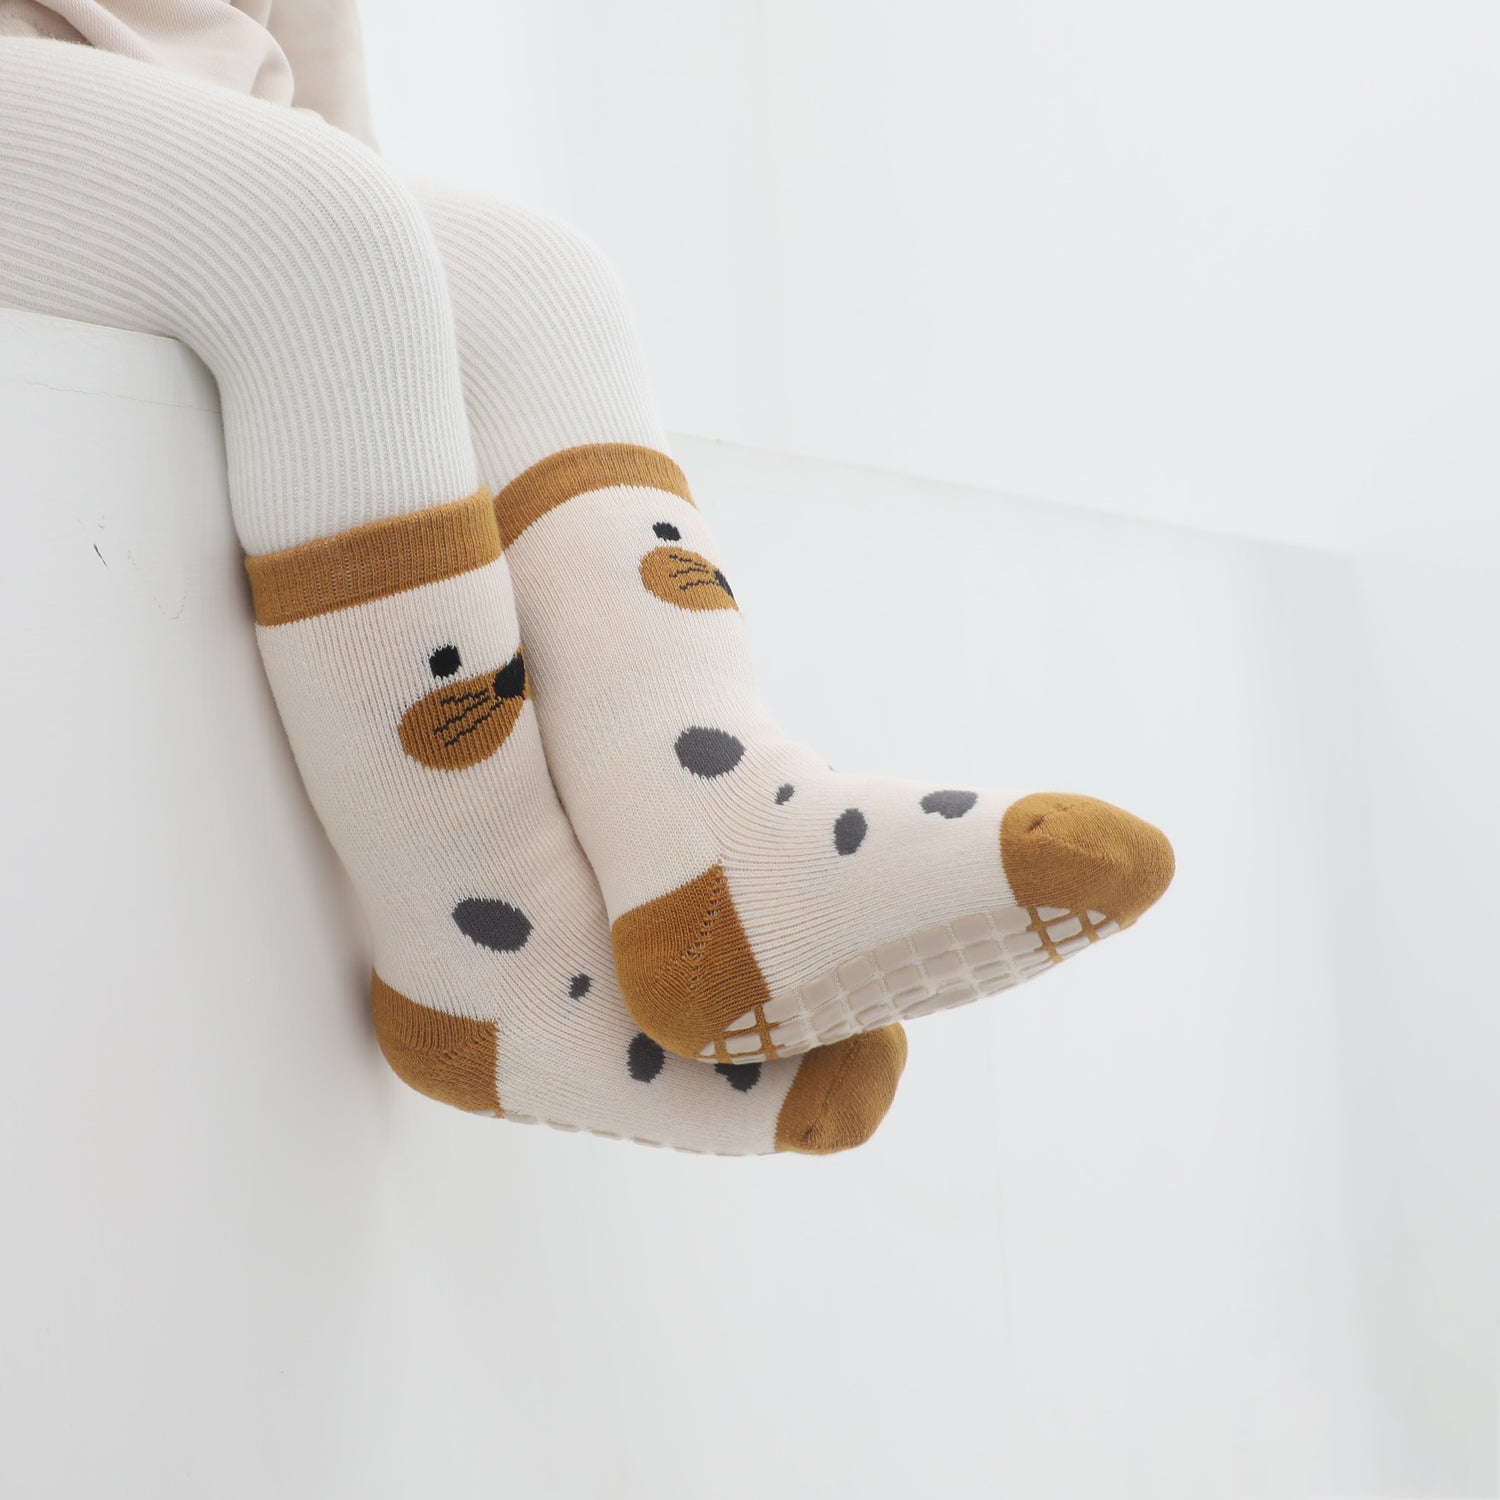 Secure-fit ankle socks with added grips, designed for the active baby on the move.